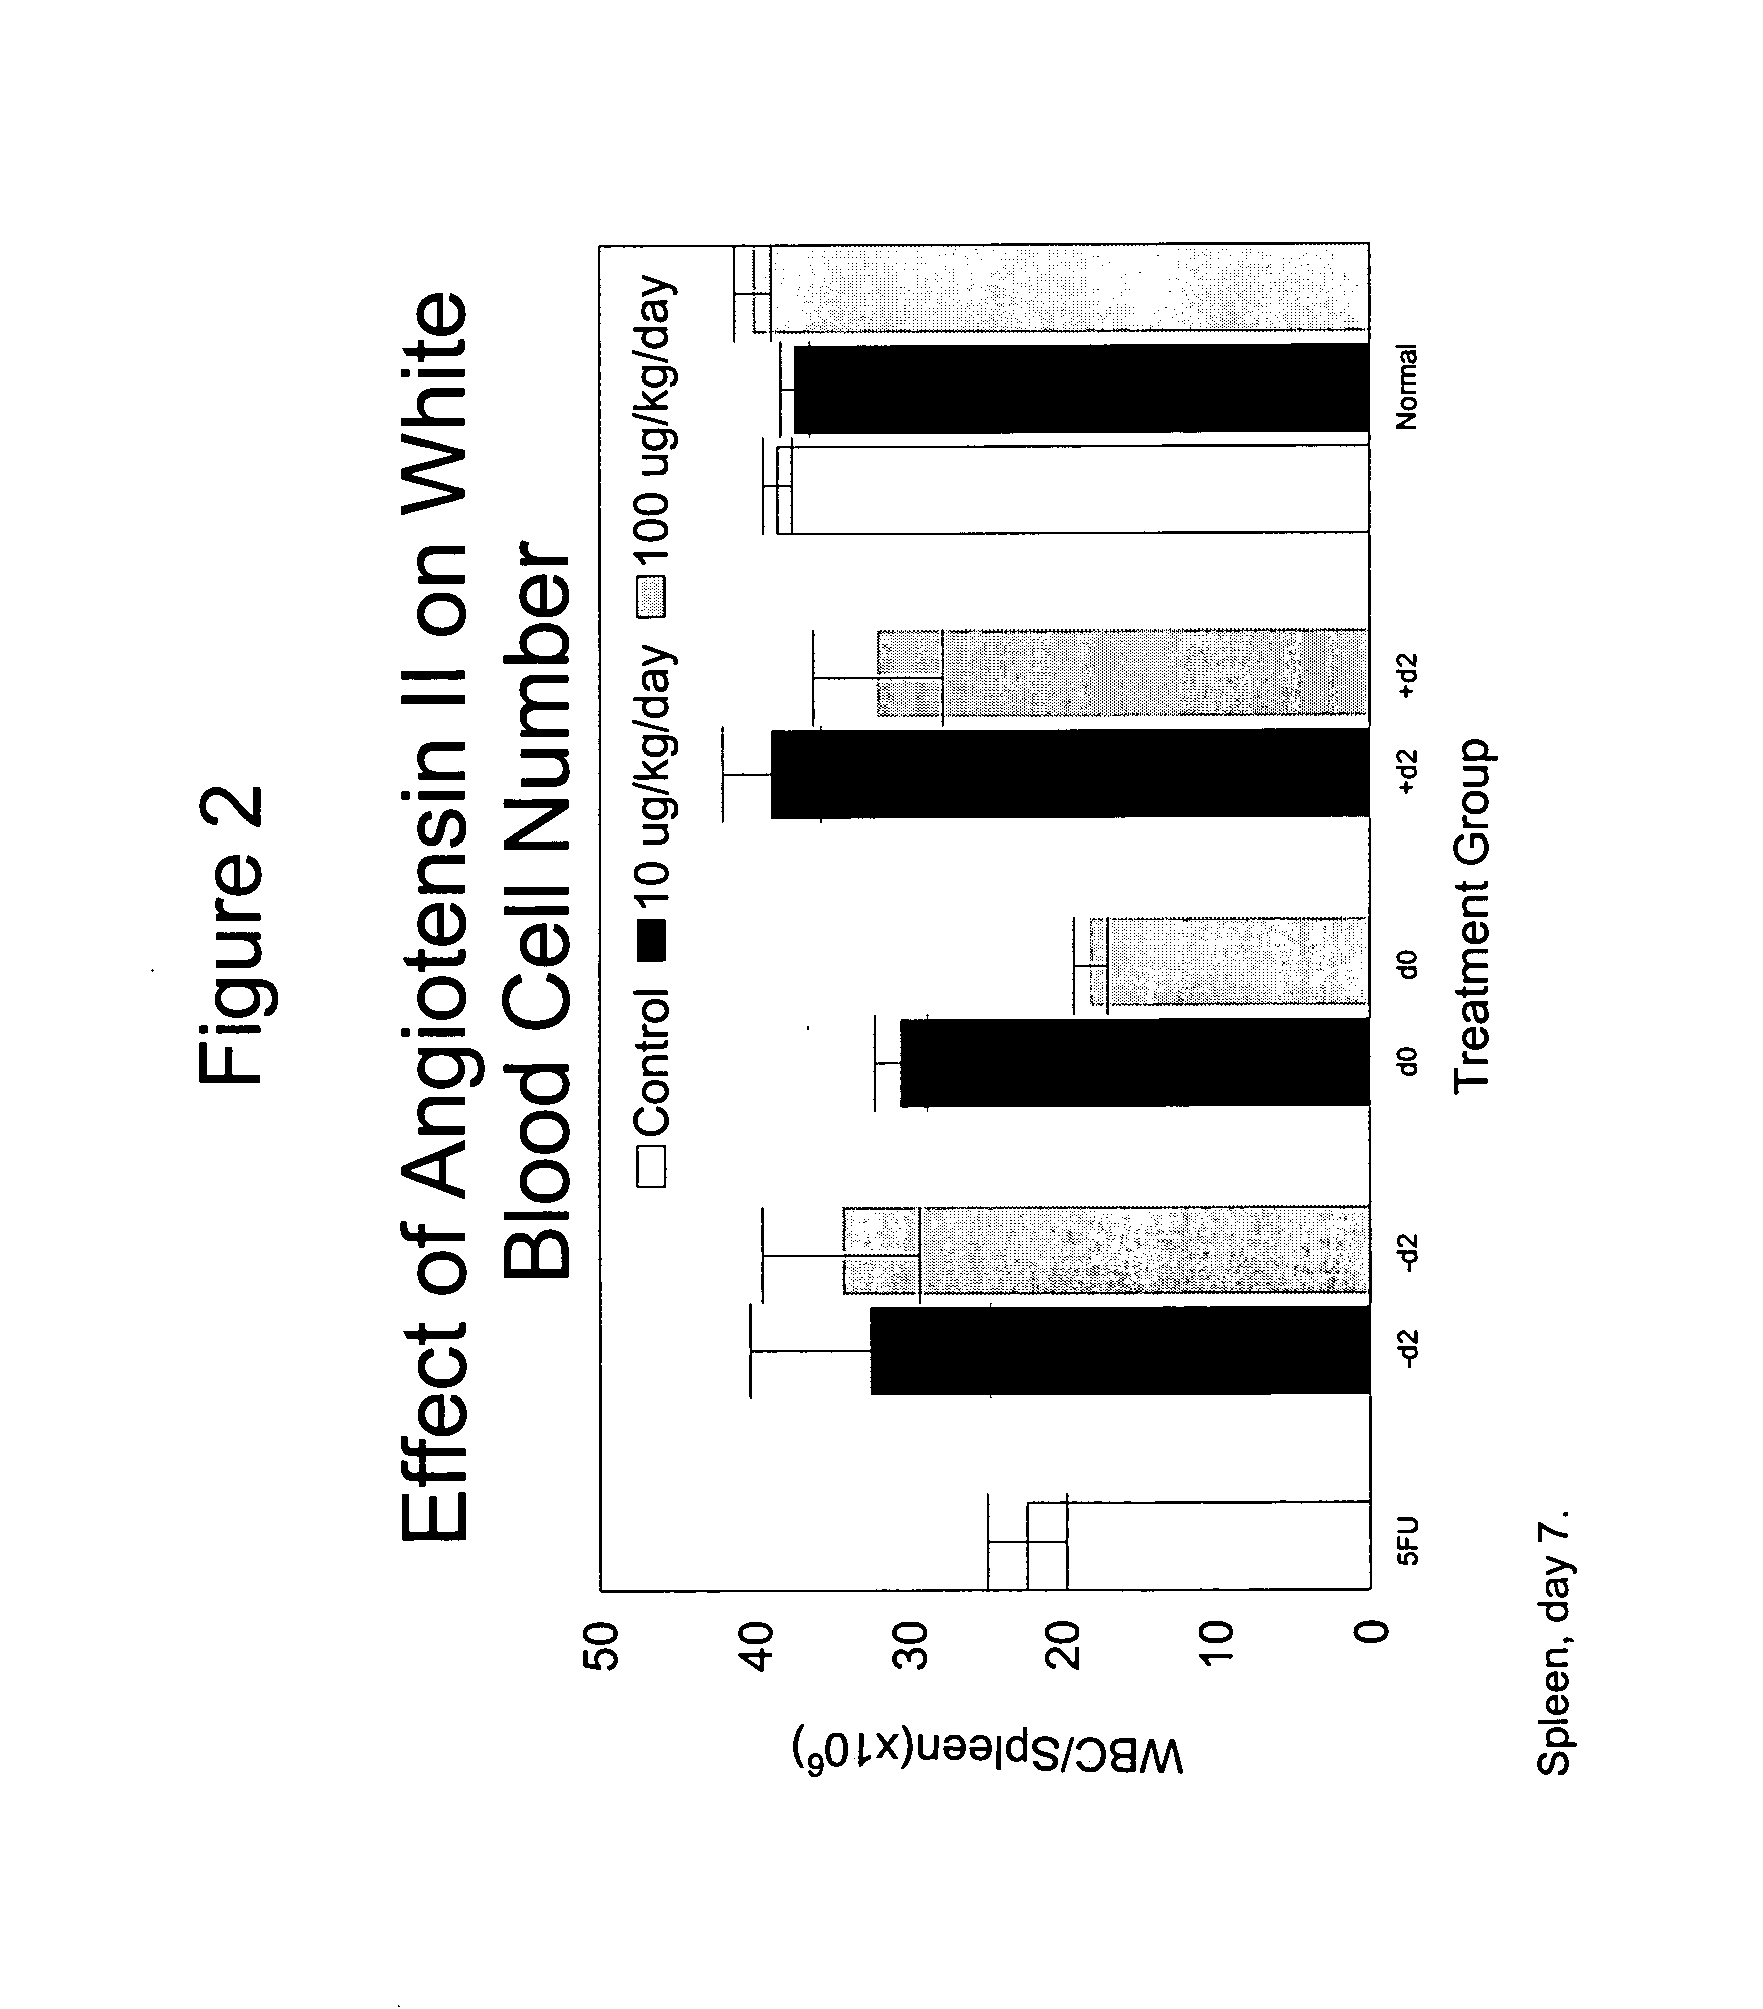 Method for treating a patient undergoing chemotherapy